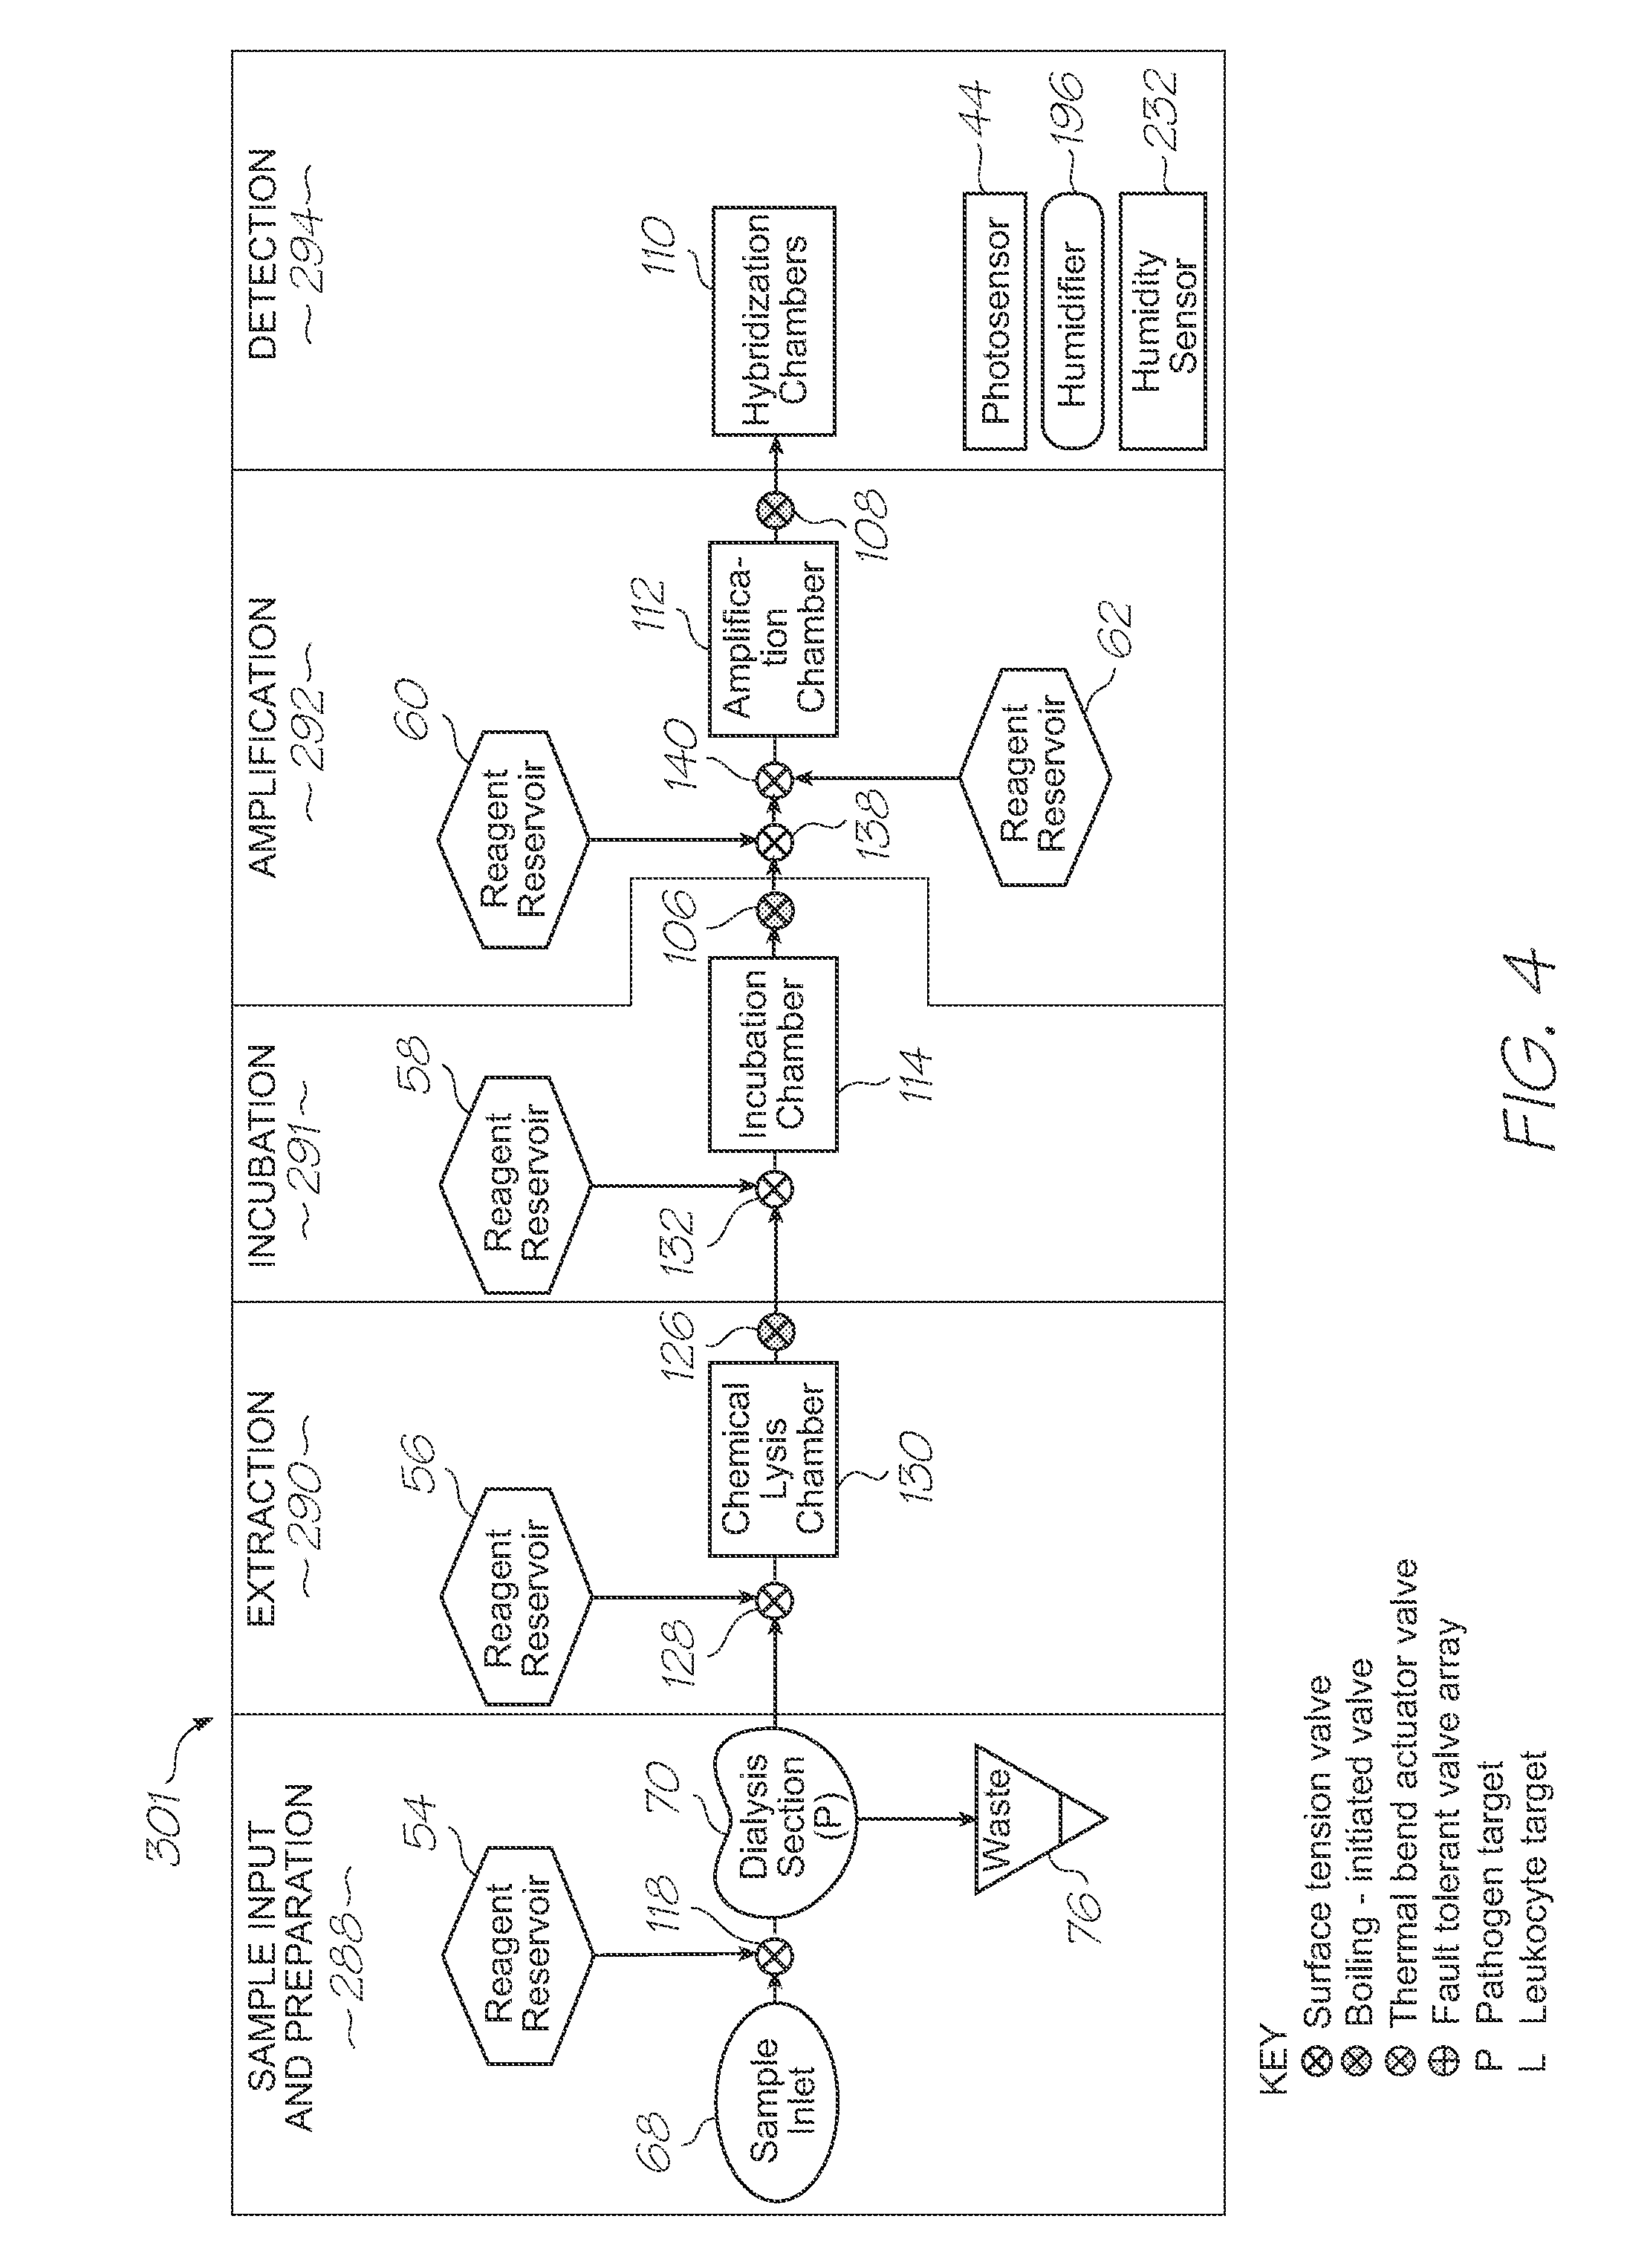 Microfluidic device with sample inlet, electrochemiluminescent probes and integrated photosensor for detection of target sequences